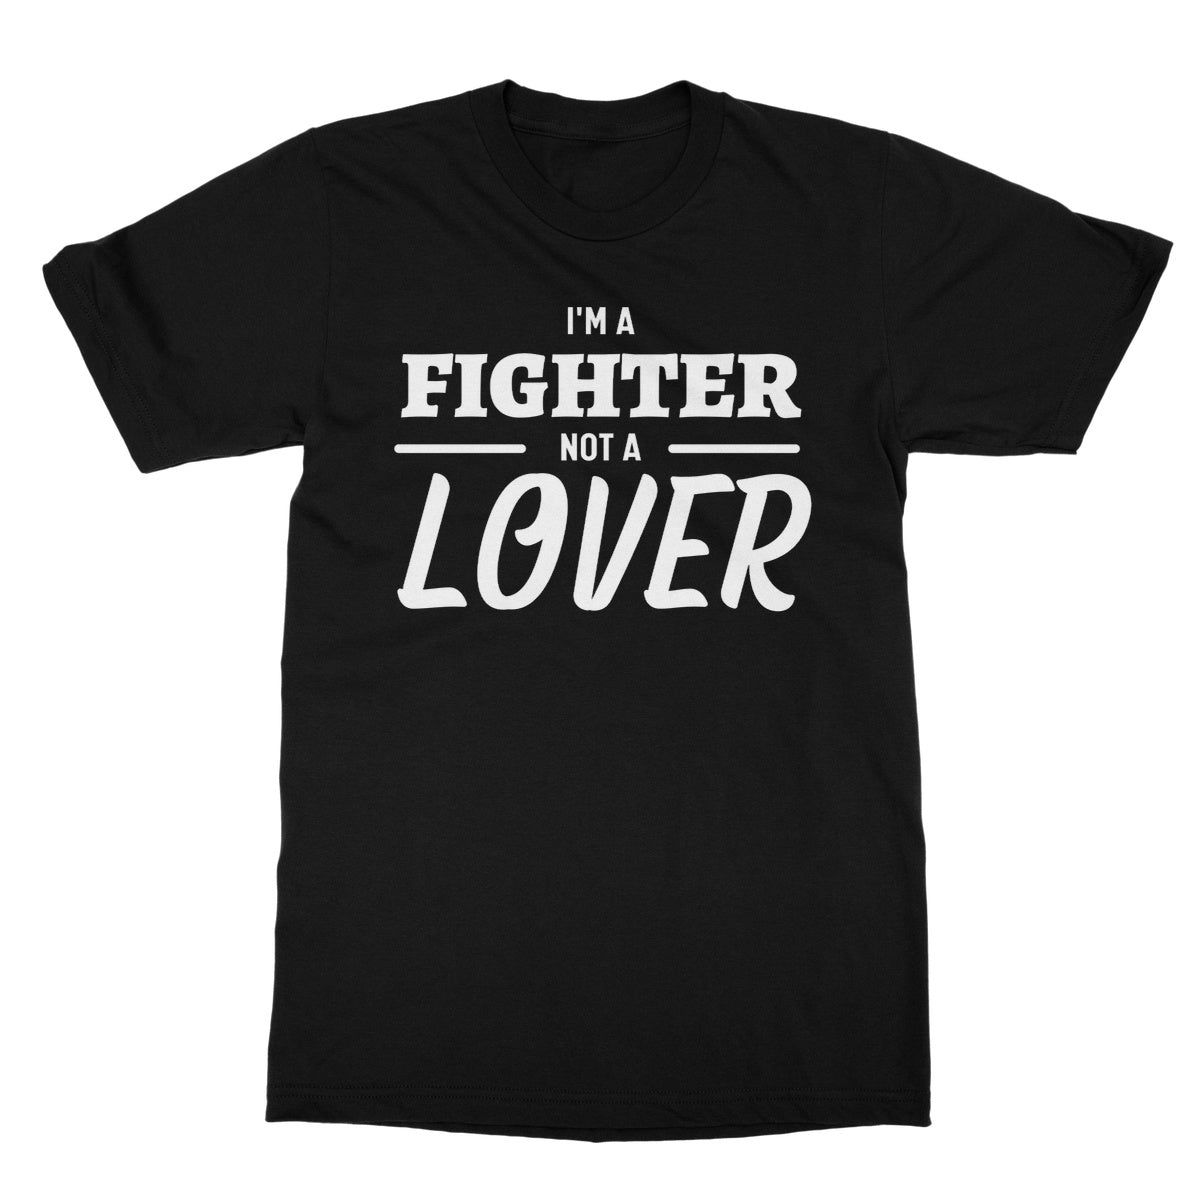 I'm a fighter not a lover t shirt black